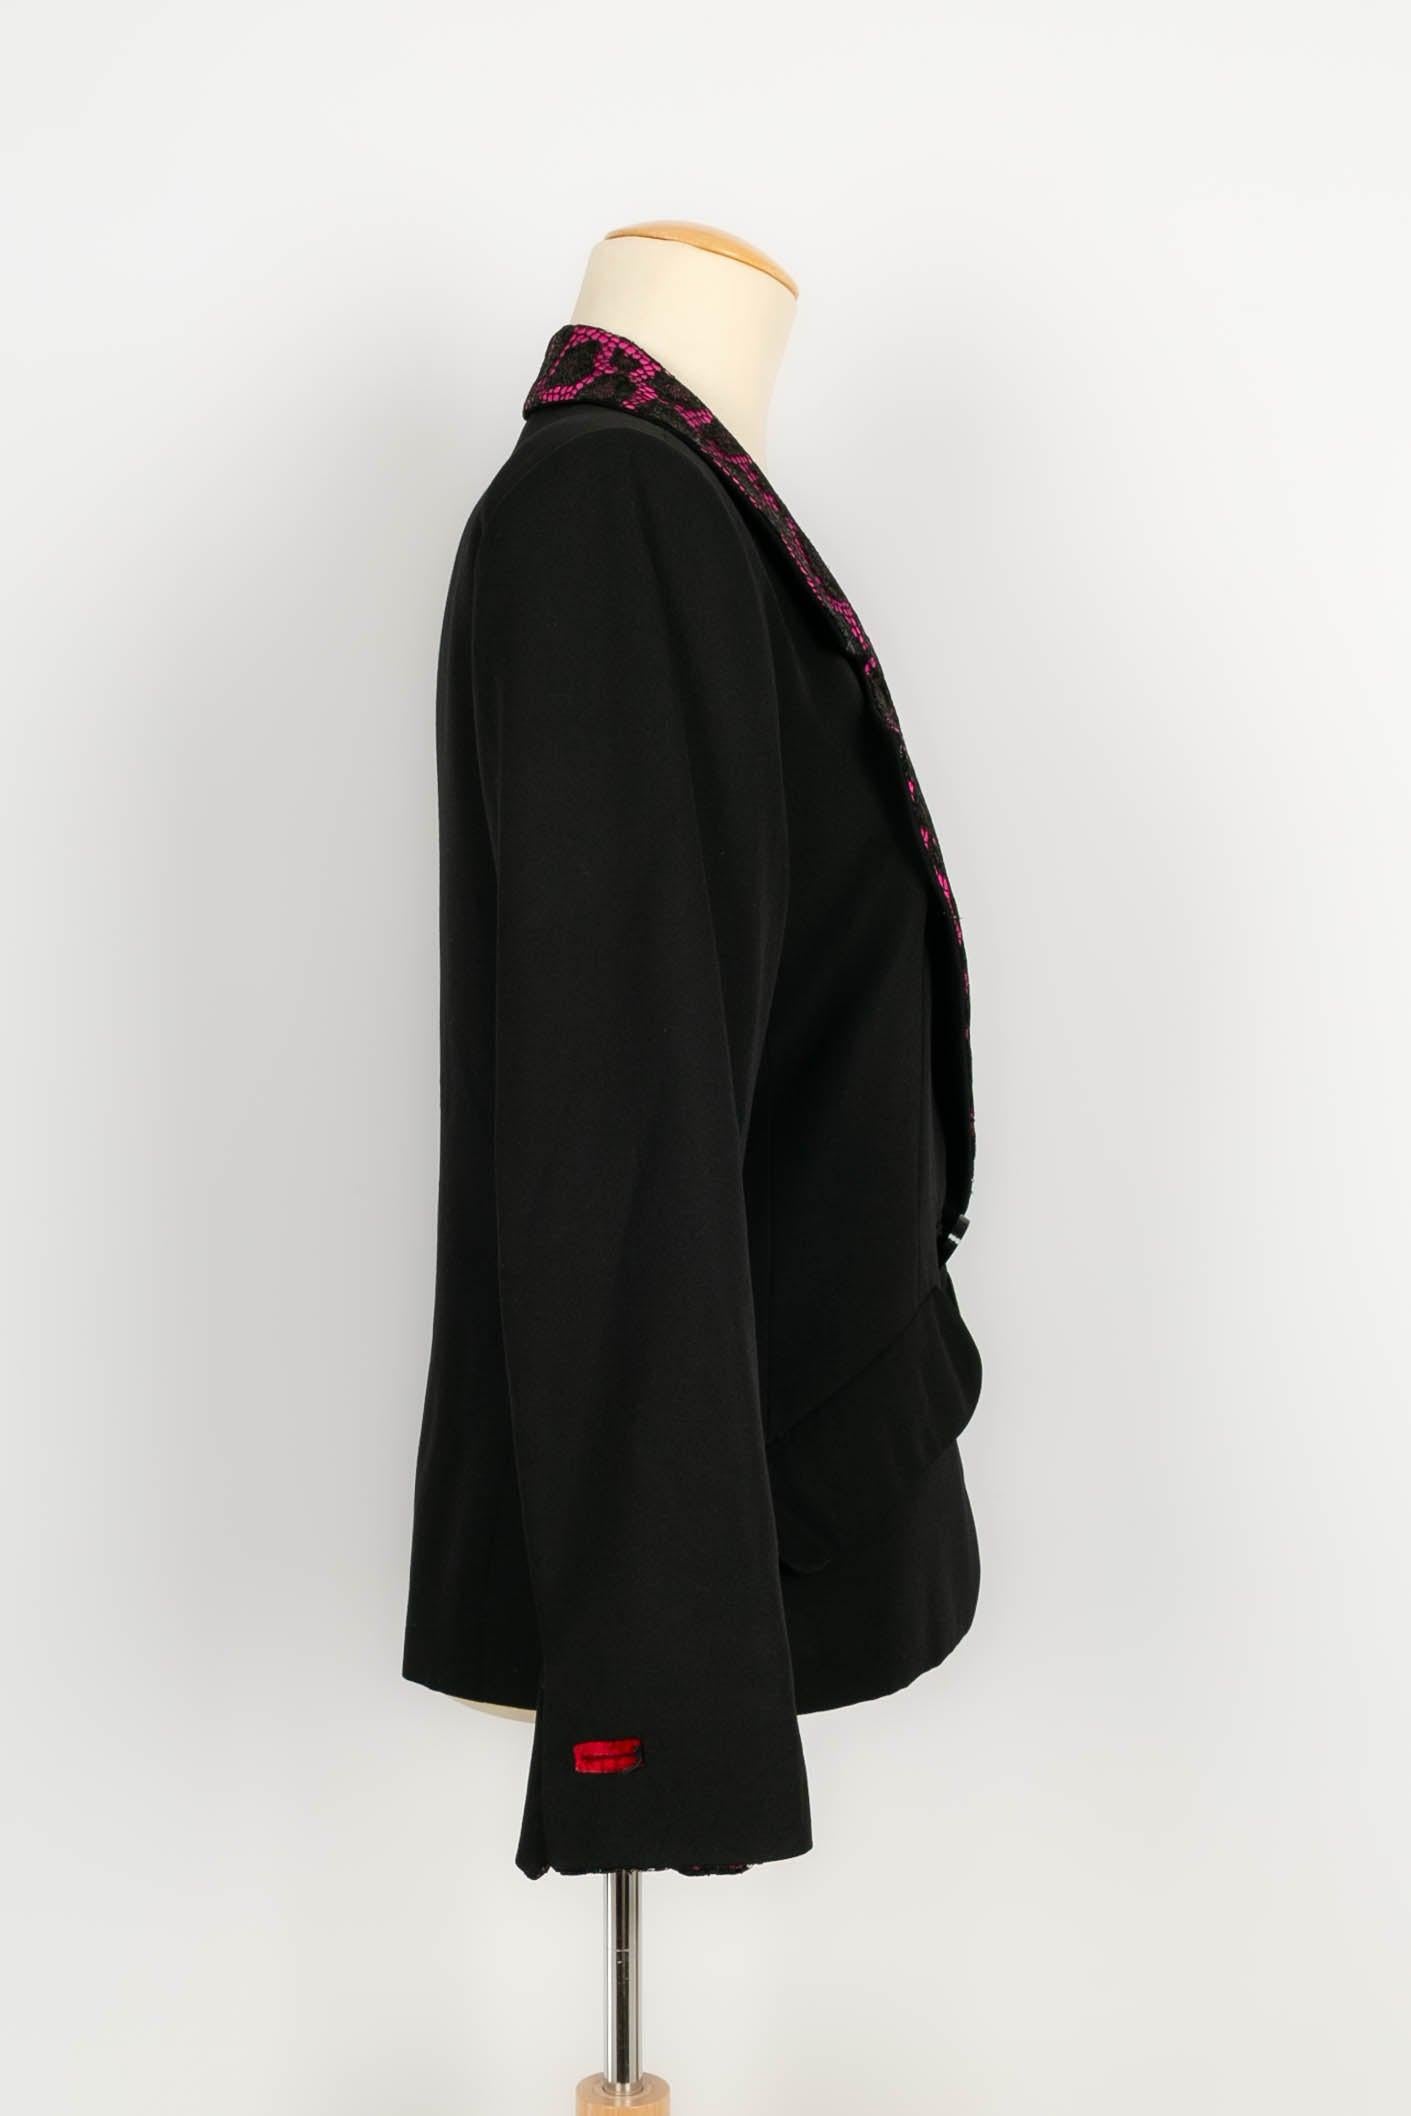 Women's Yves Saint Laurent Winter  Black Wool and Lace Jacket, 1990 For Sale